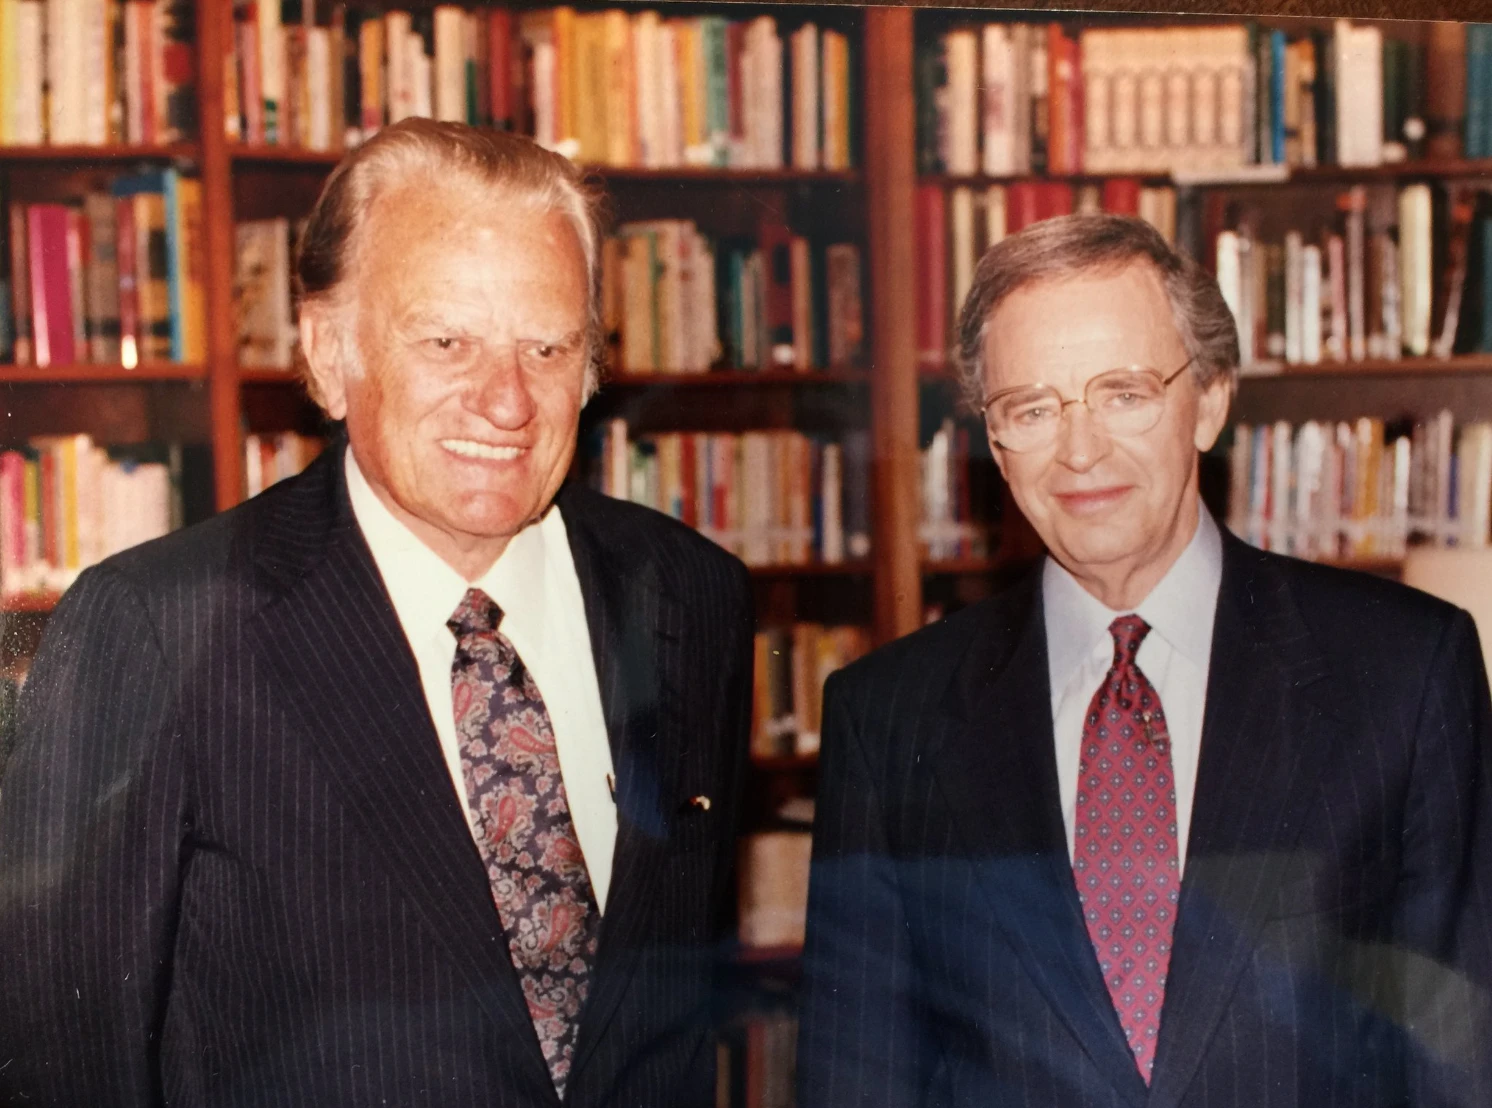 A historic meeting between two anointed men of God - Billy Graham and Charles Stanley.